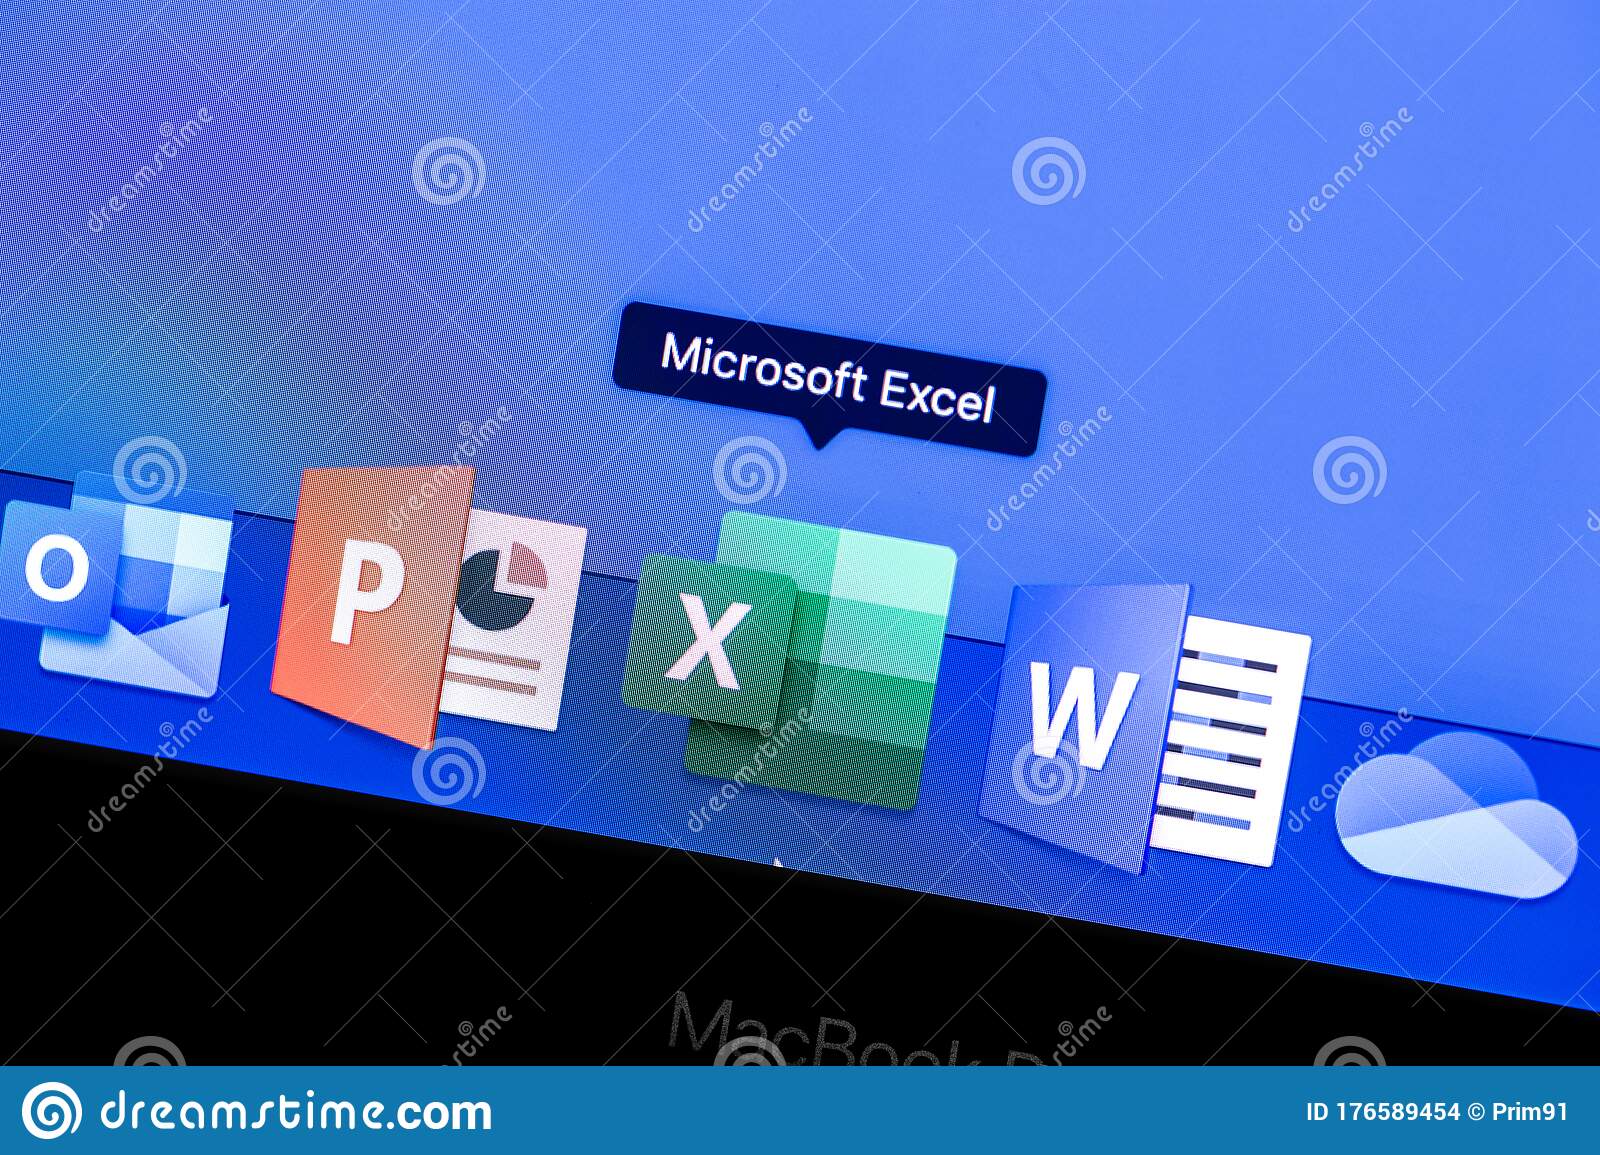 which is the real microsolf excel for mac